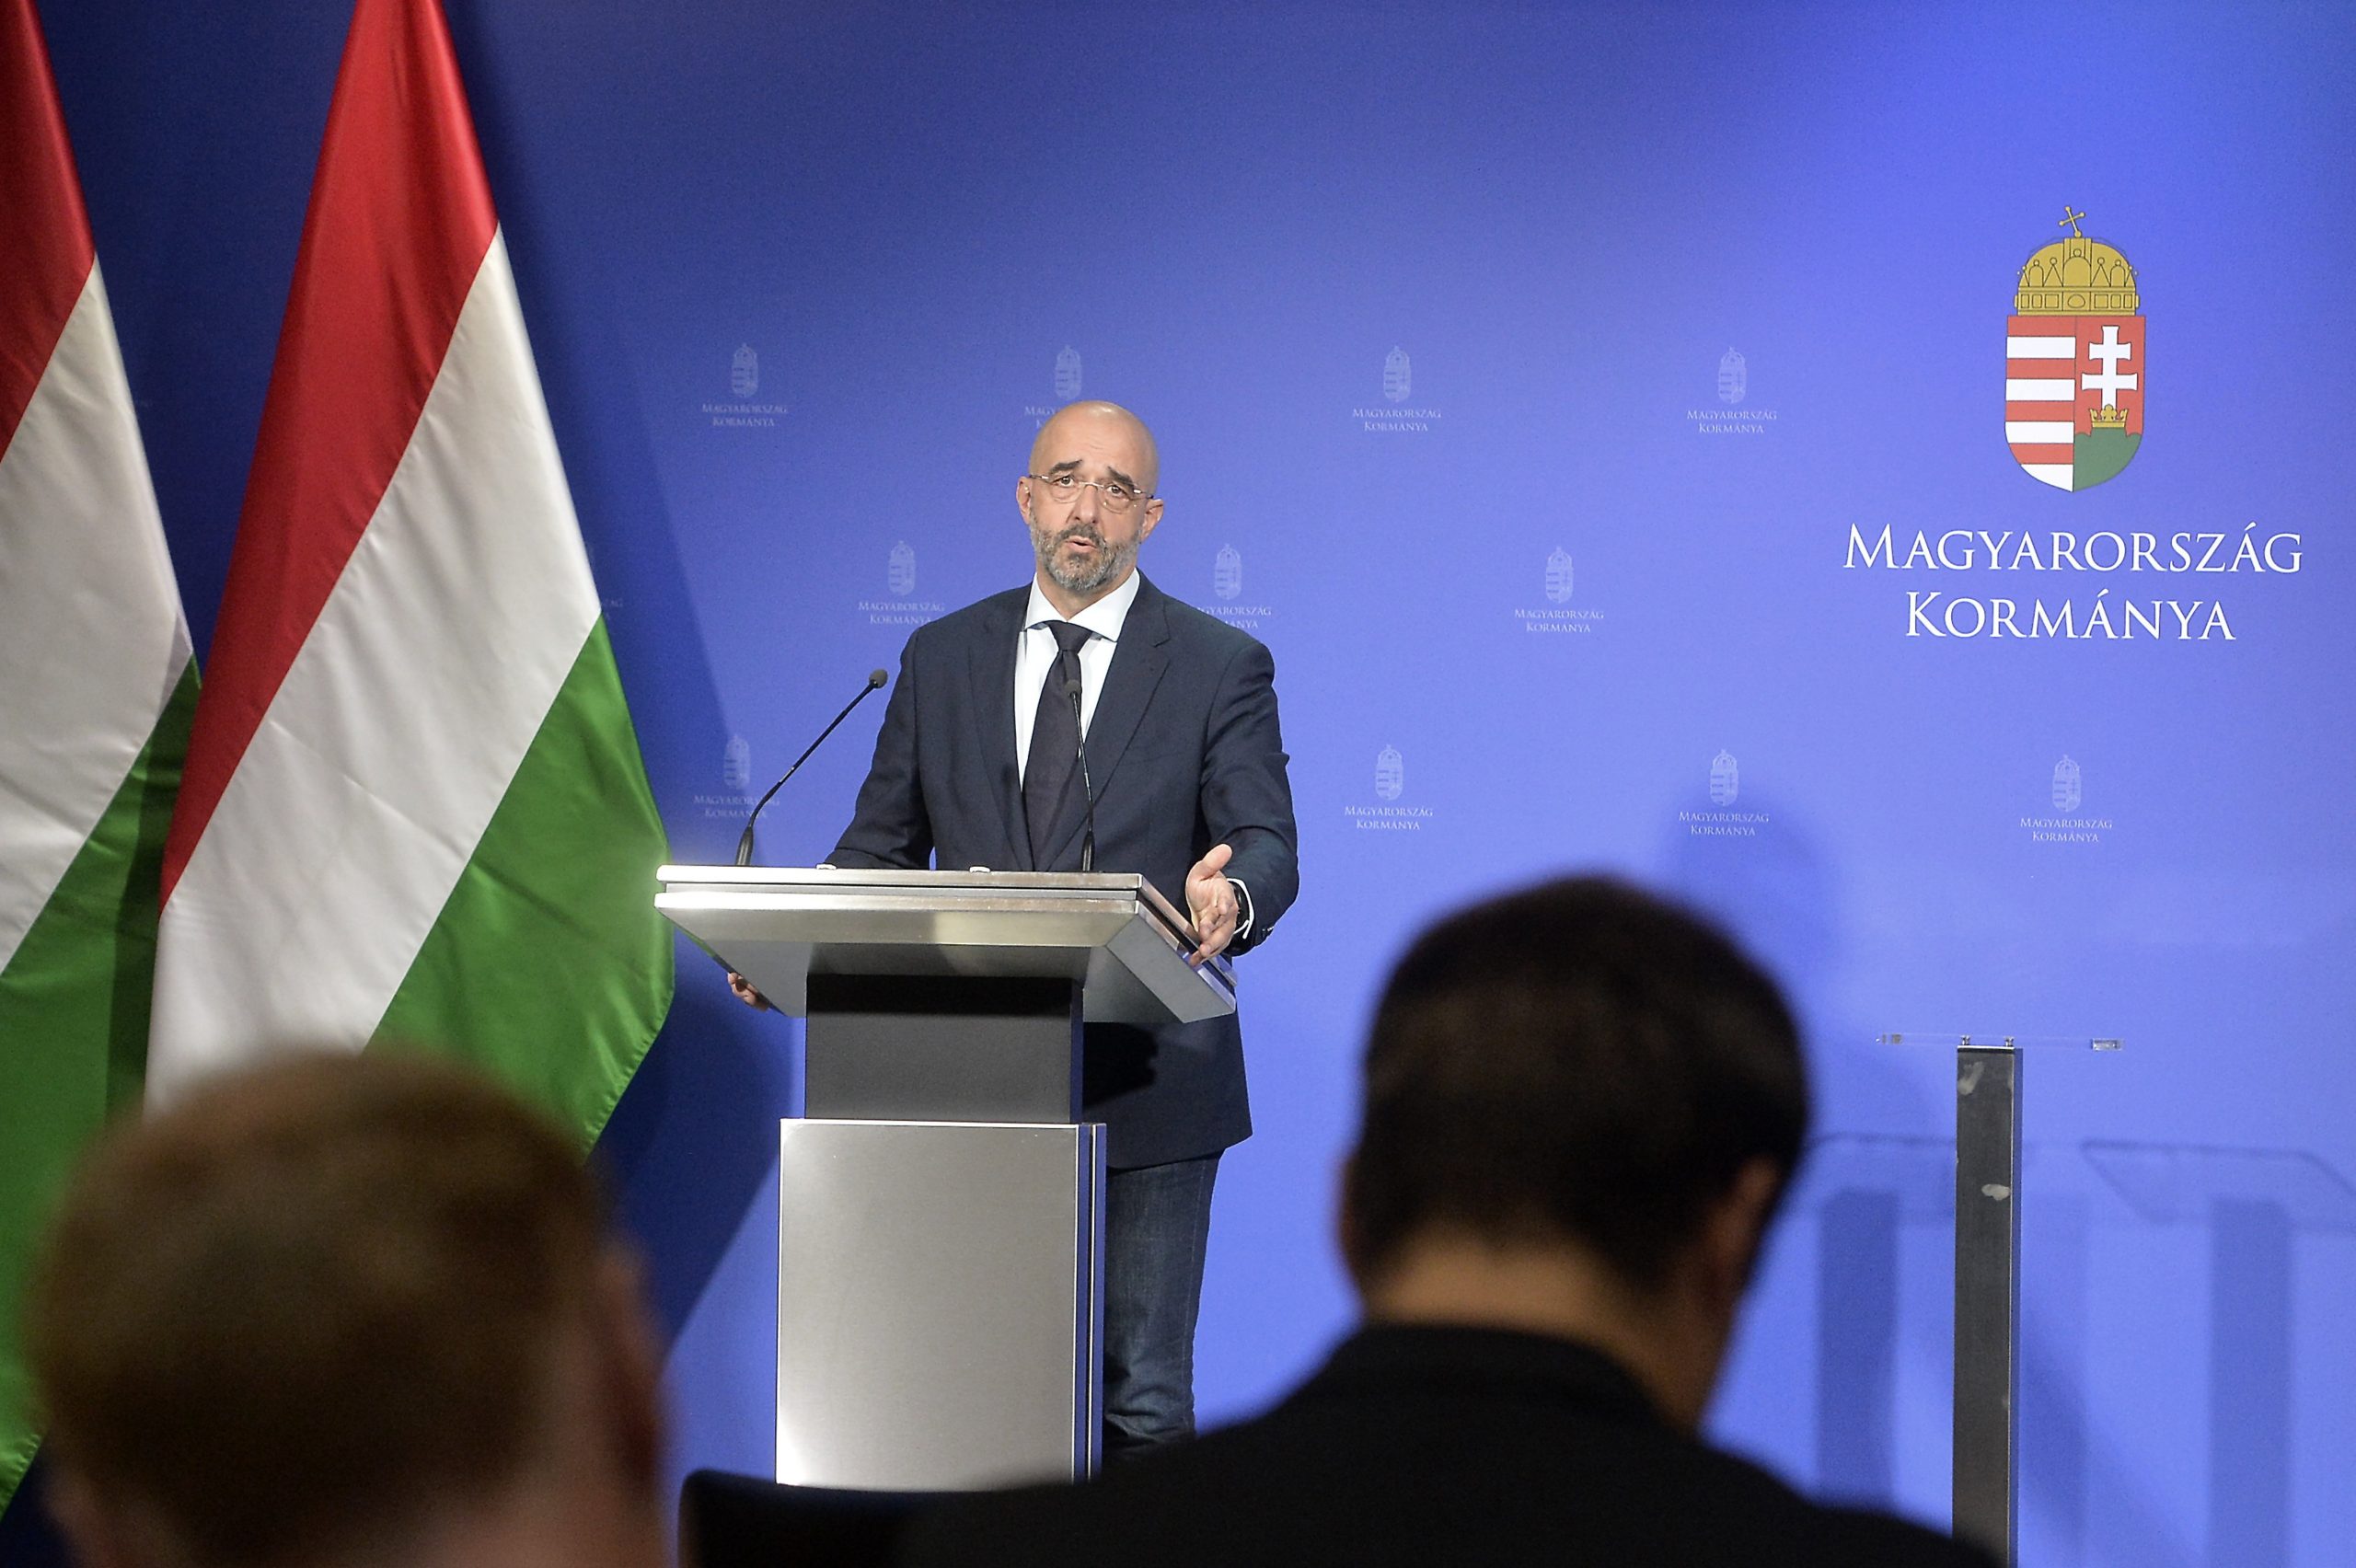 Gov't: Hungary's Electoral System among Most Transparent